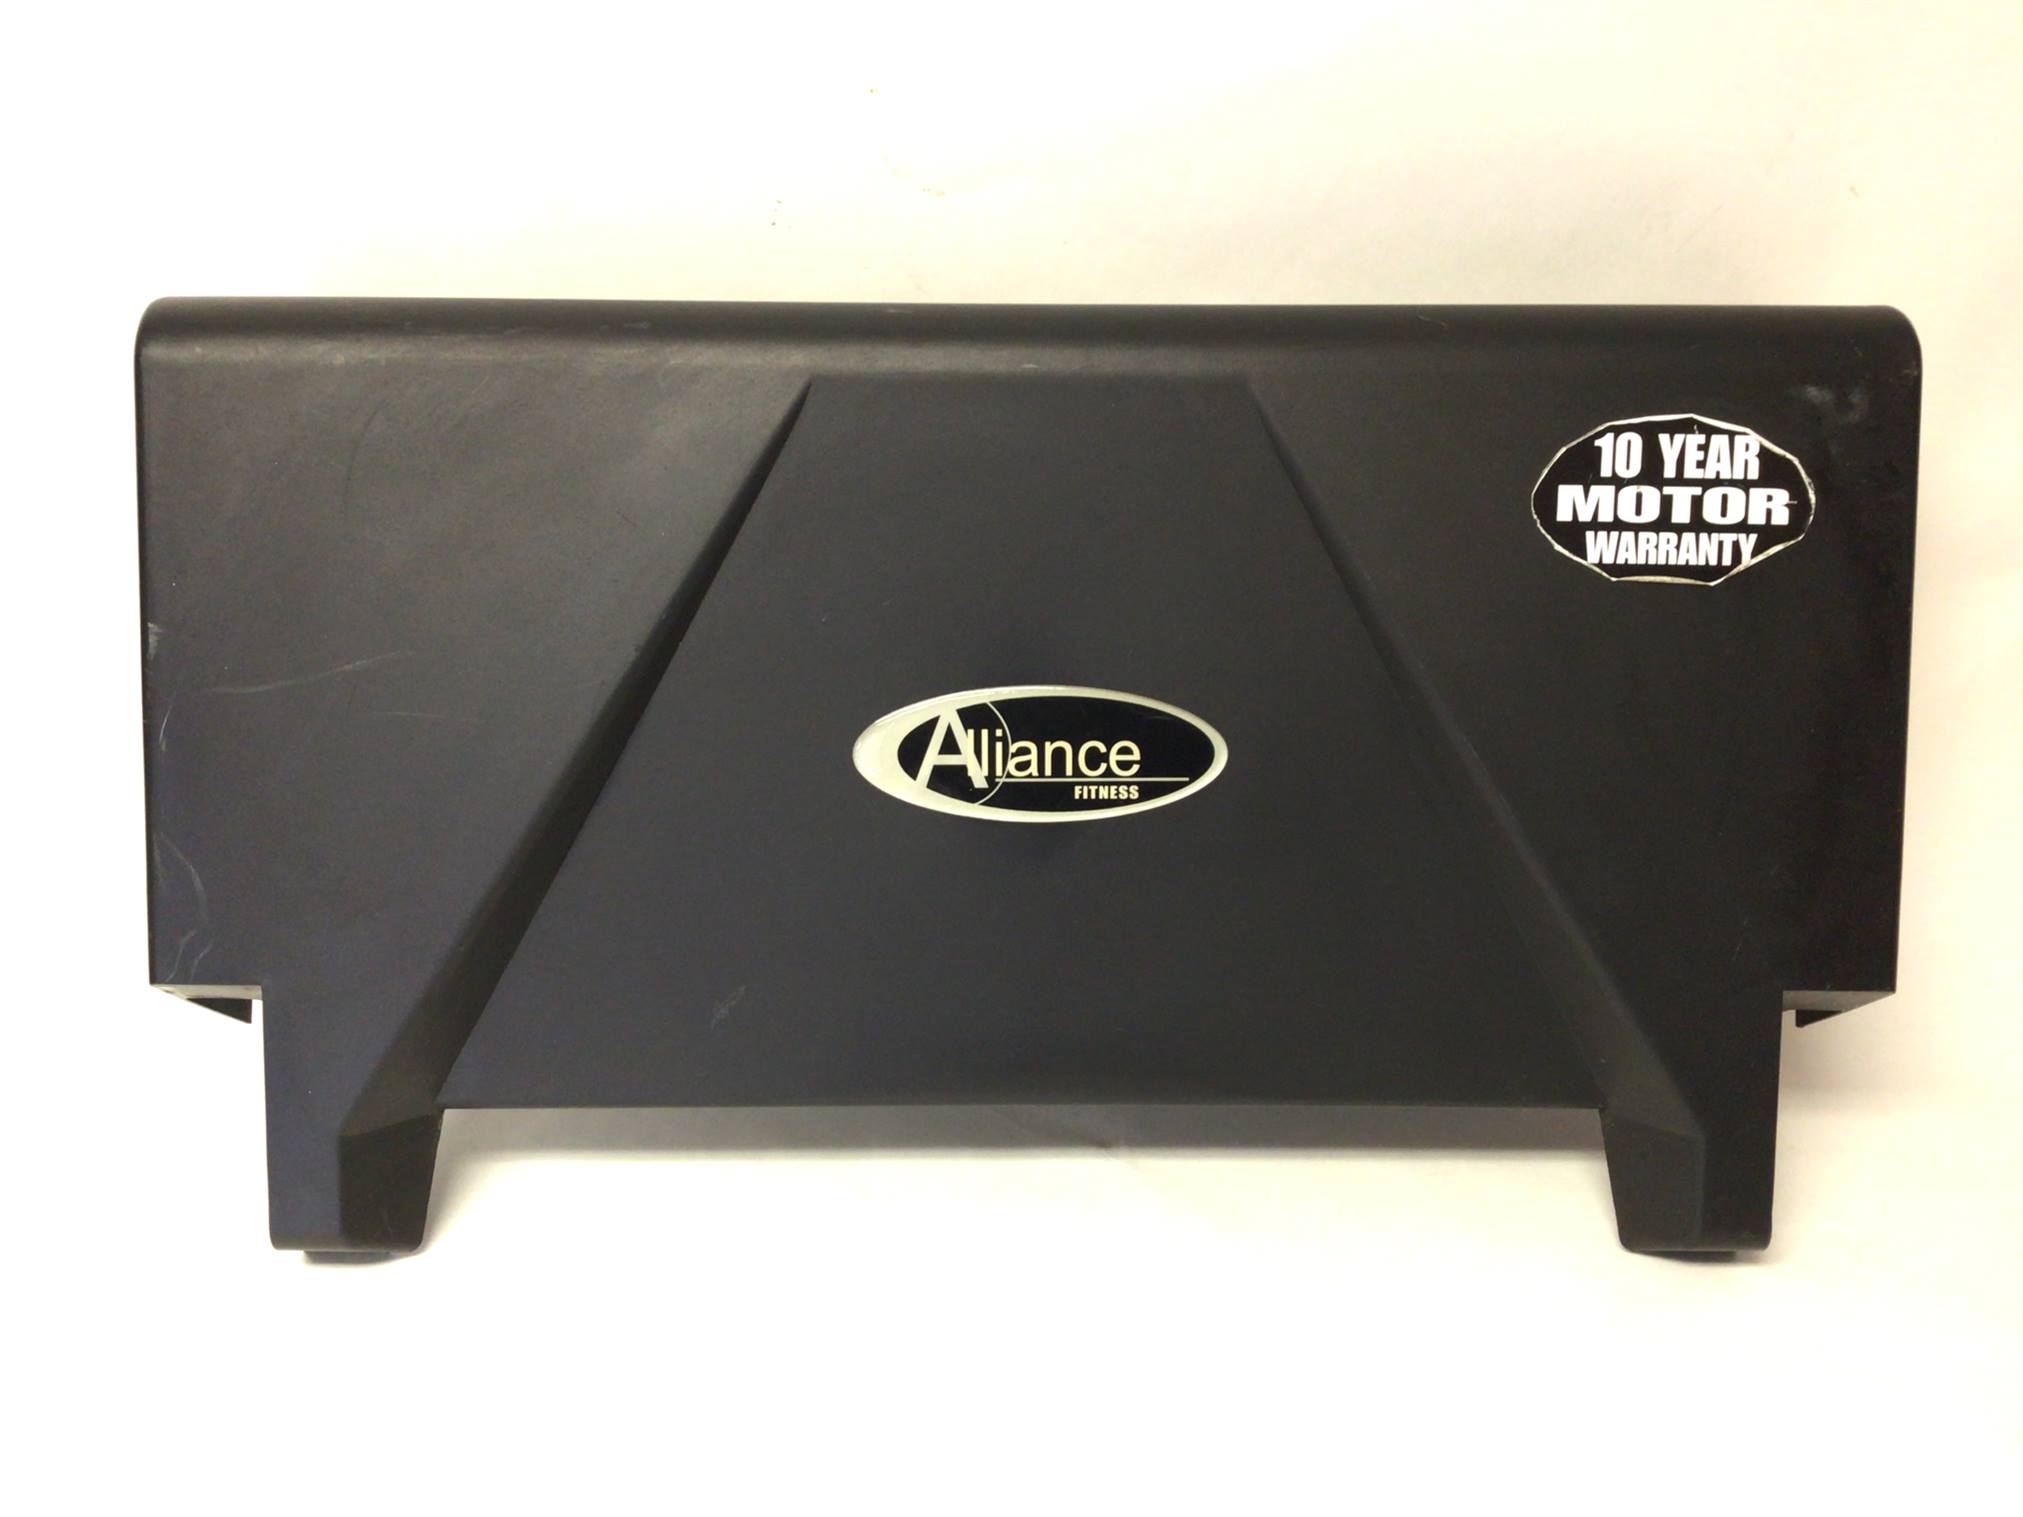 Alliance - Ironman - Keys - Smooth Motor Cover (Used)